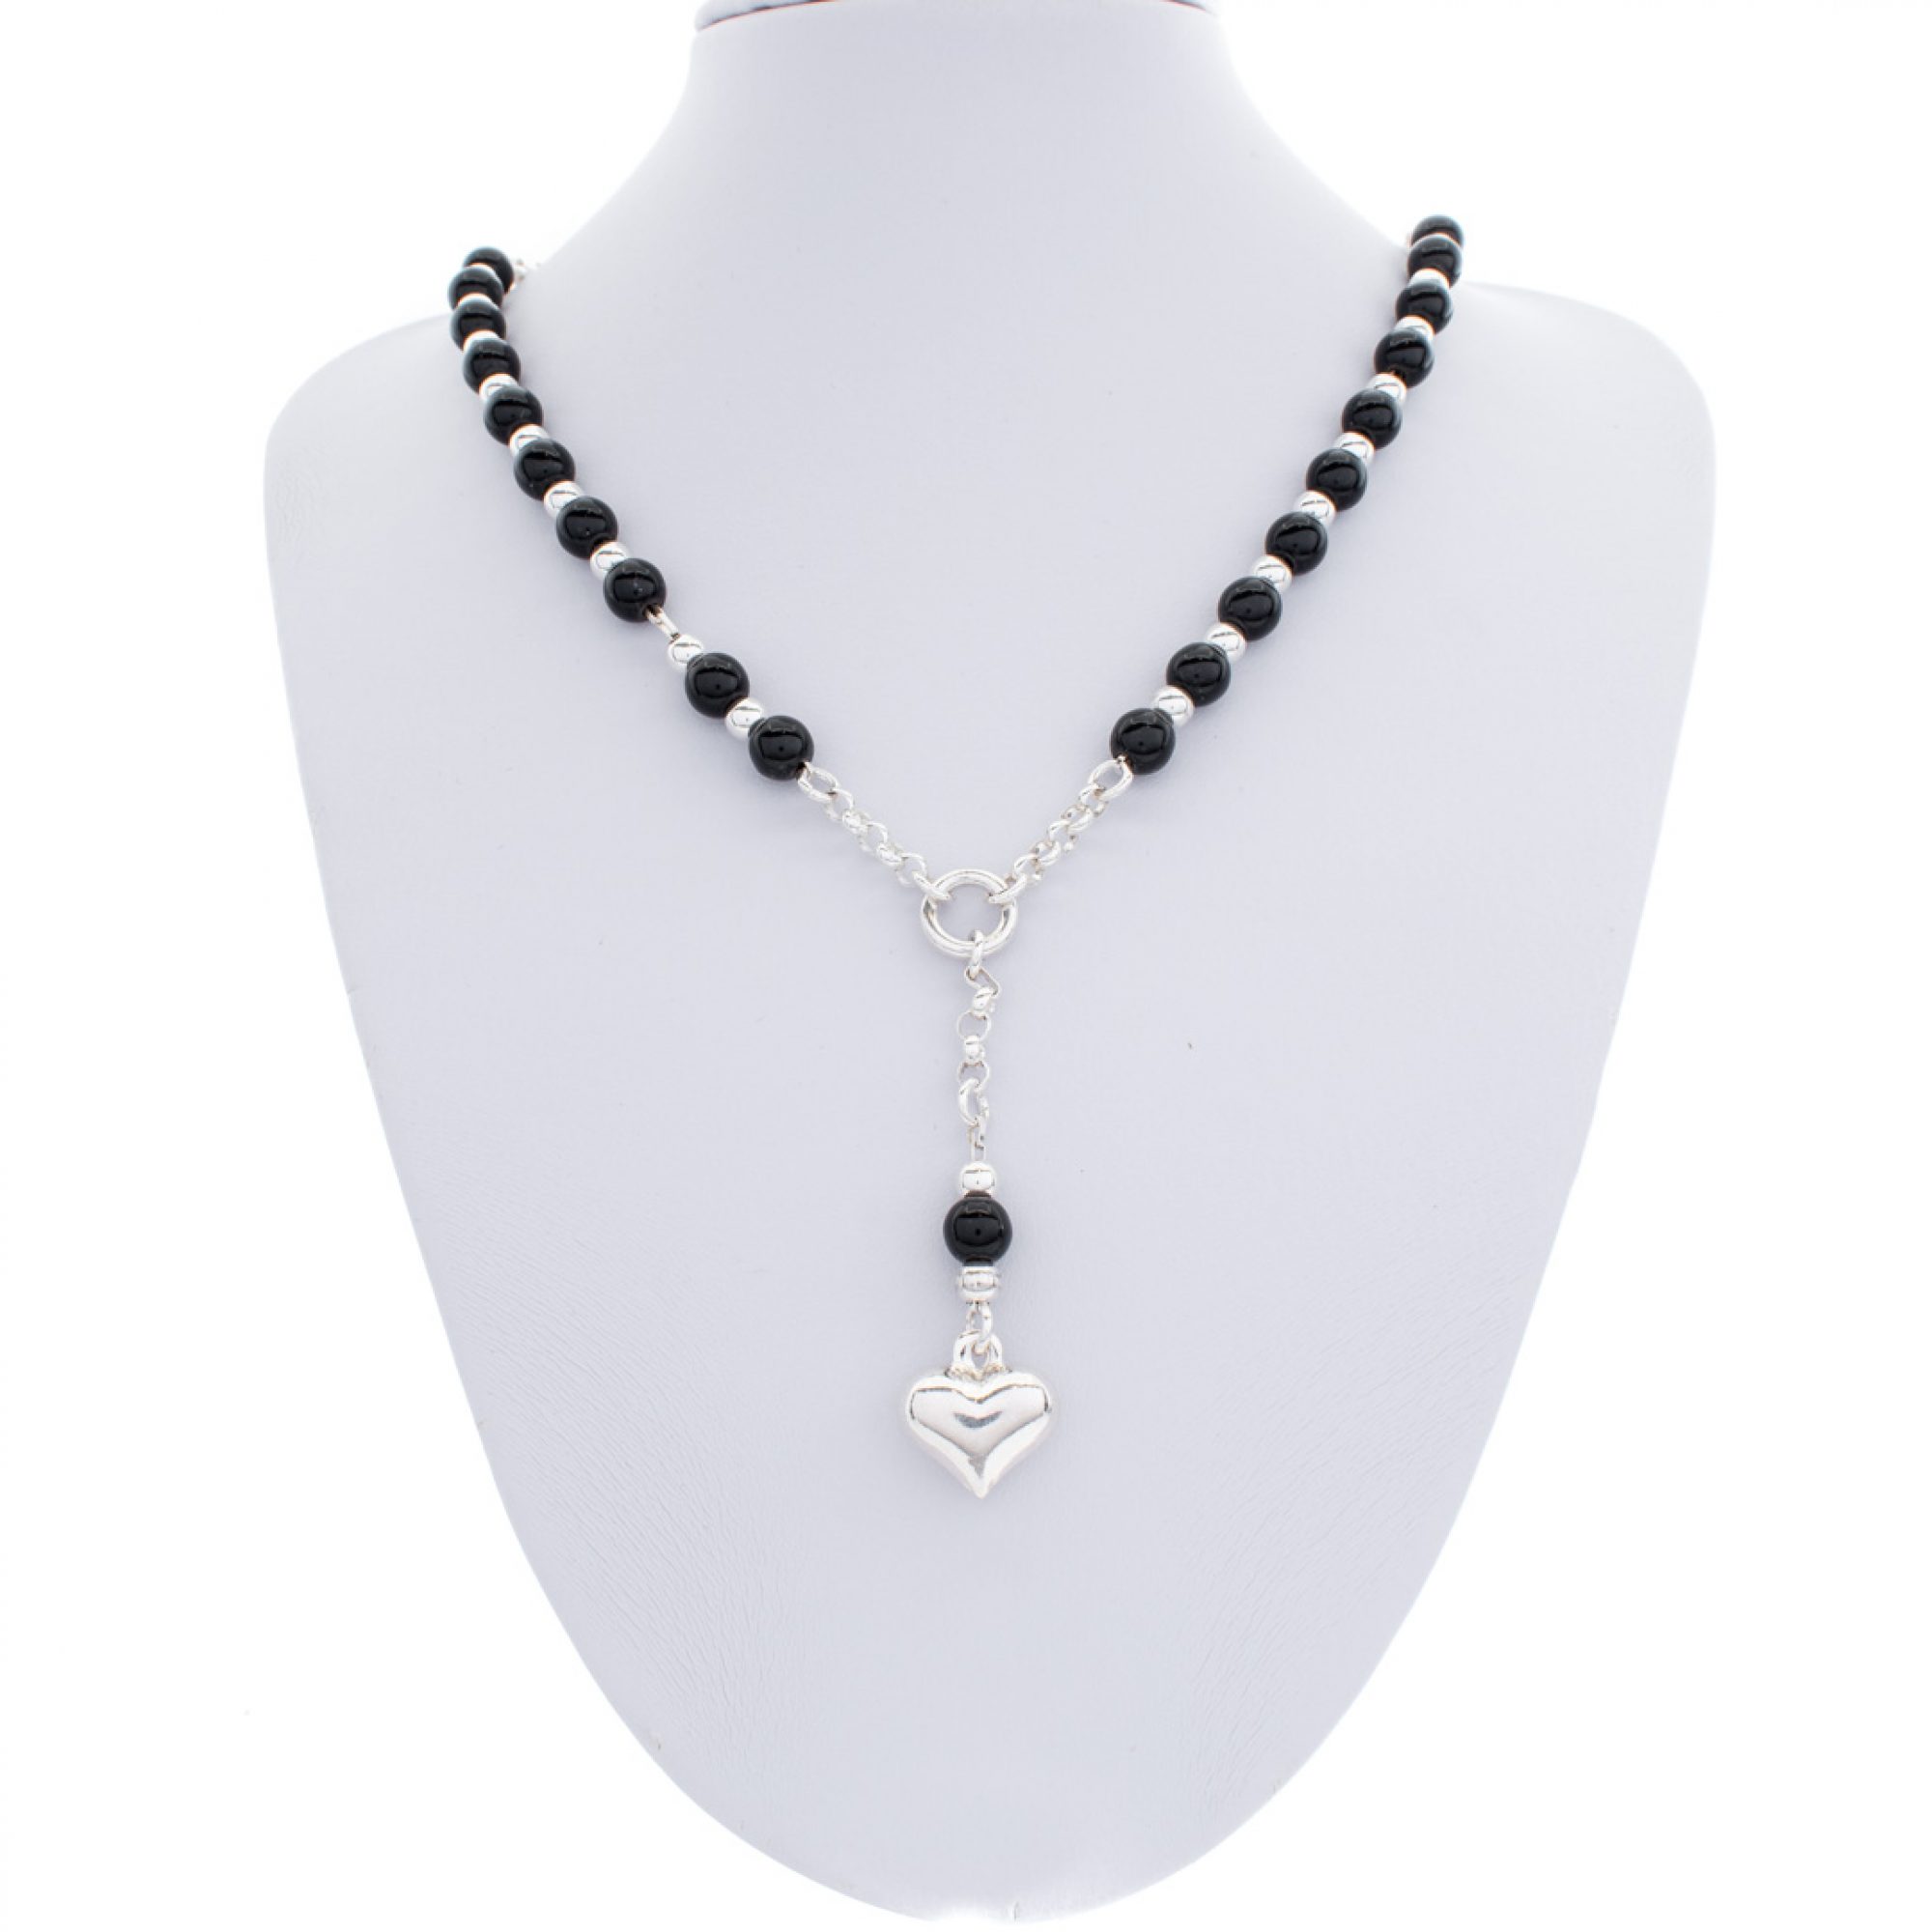 Y-style silver necklace with agate stones